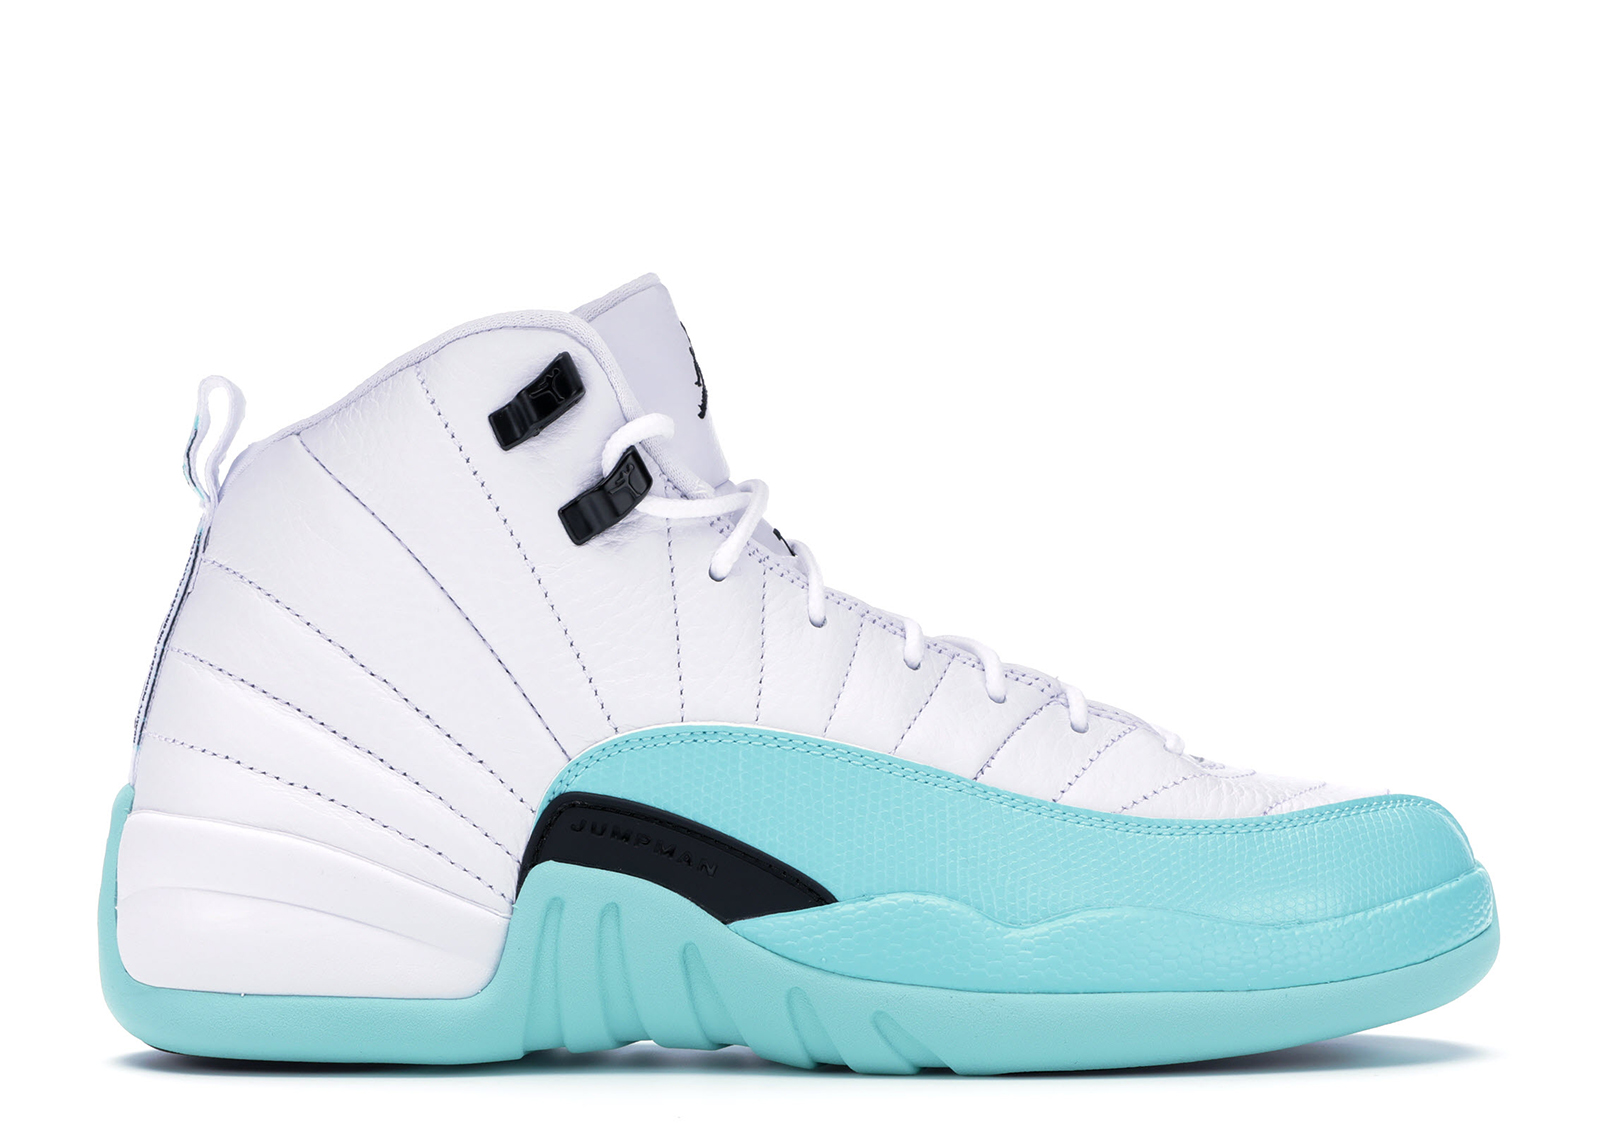 retro 12 teal and white